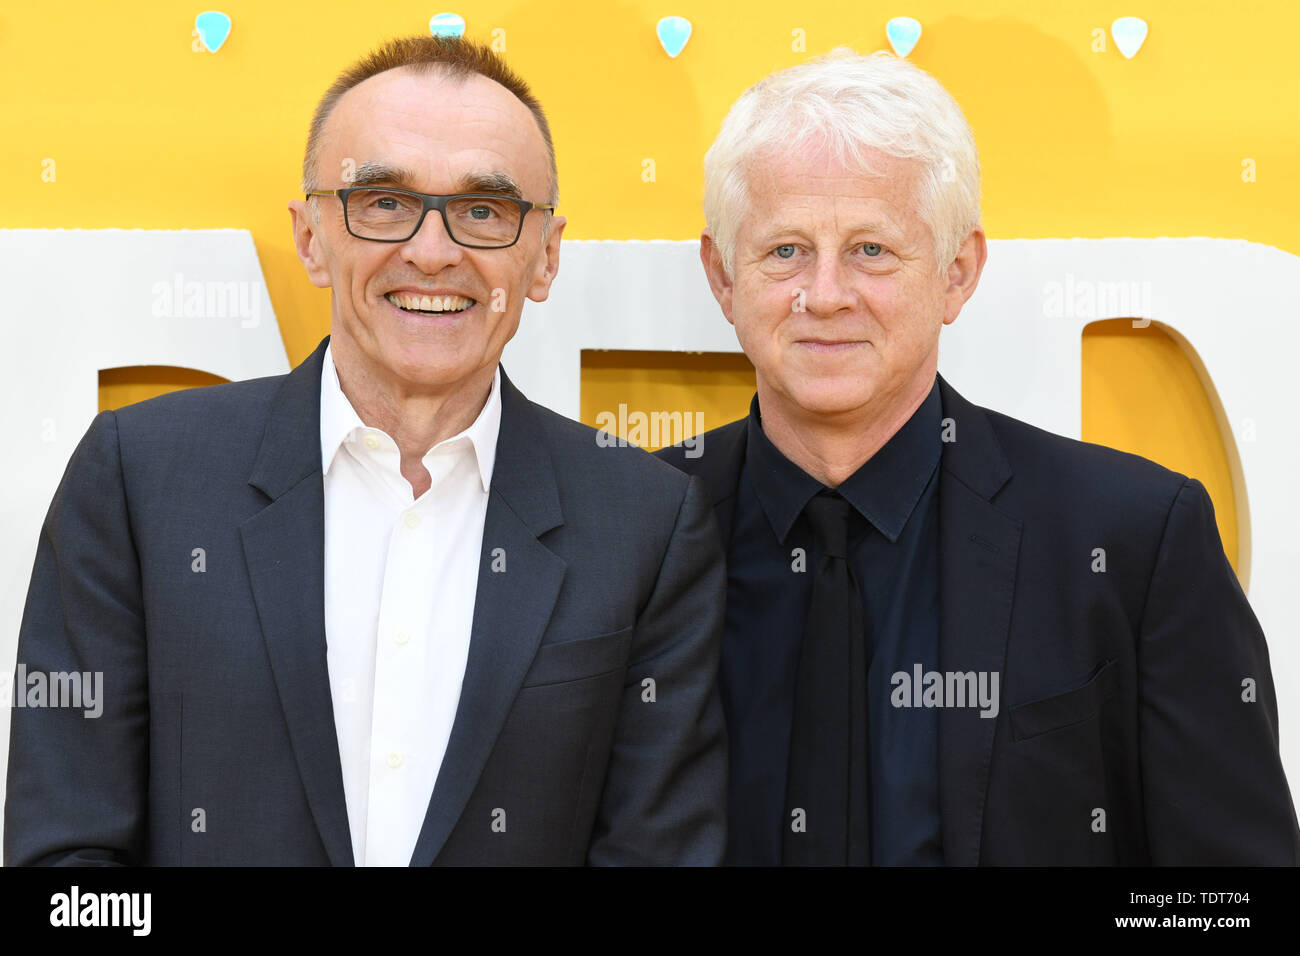 London, UK. 18th June, 2019. LONDON, UK. June 18, 2019: Danny Boyle and Richard Curtis arriving for the UK premiere of 'Yesterday' at the Odeon Luxe, Leicester Square, London. Picture: Steve Vas/Featureflash Credit: Paul Smith/Alamy Live News Stock Photo